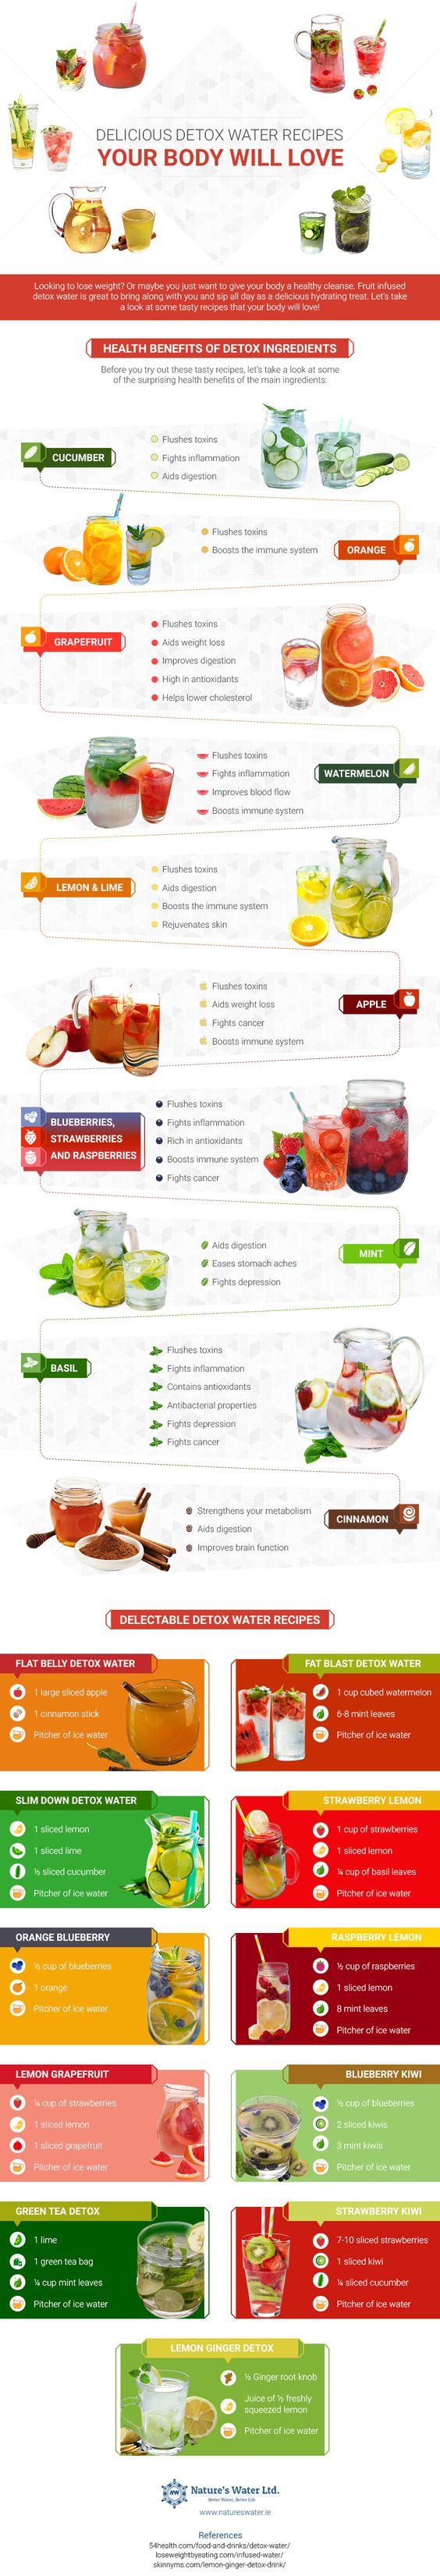 Water Recipes For a Healthy Body